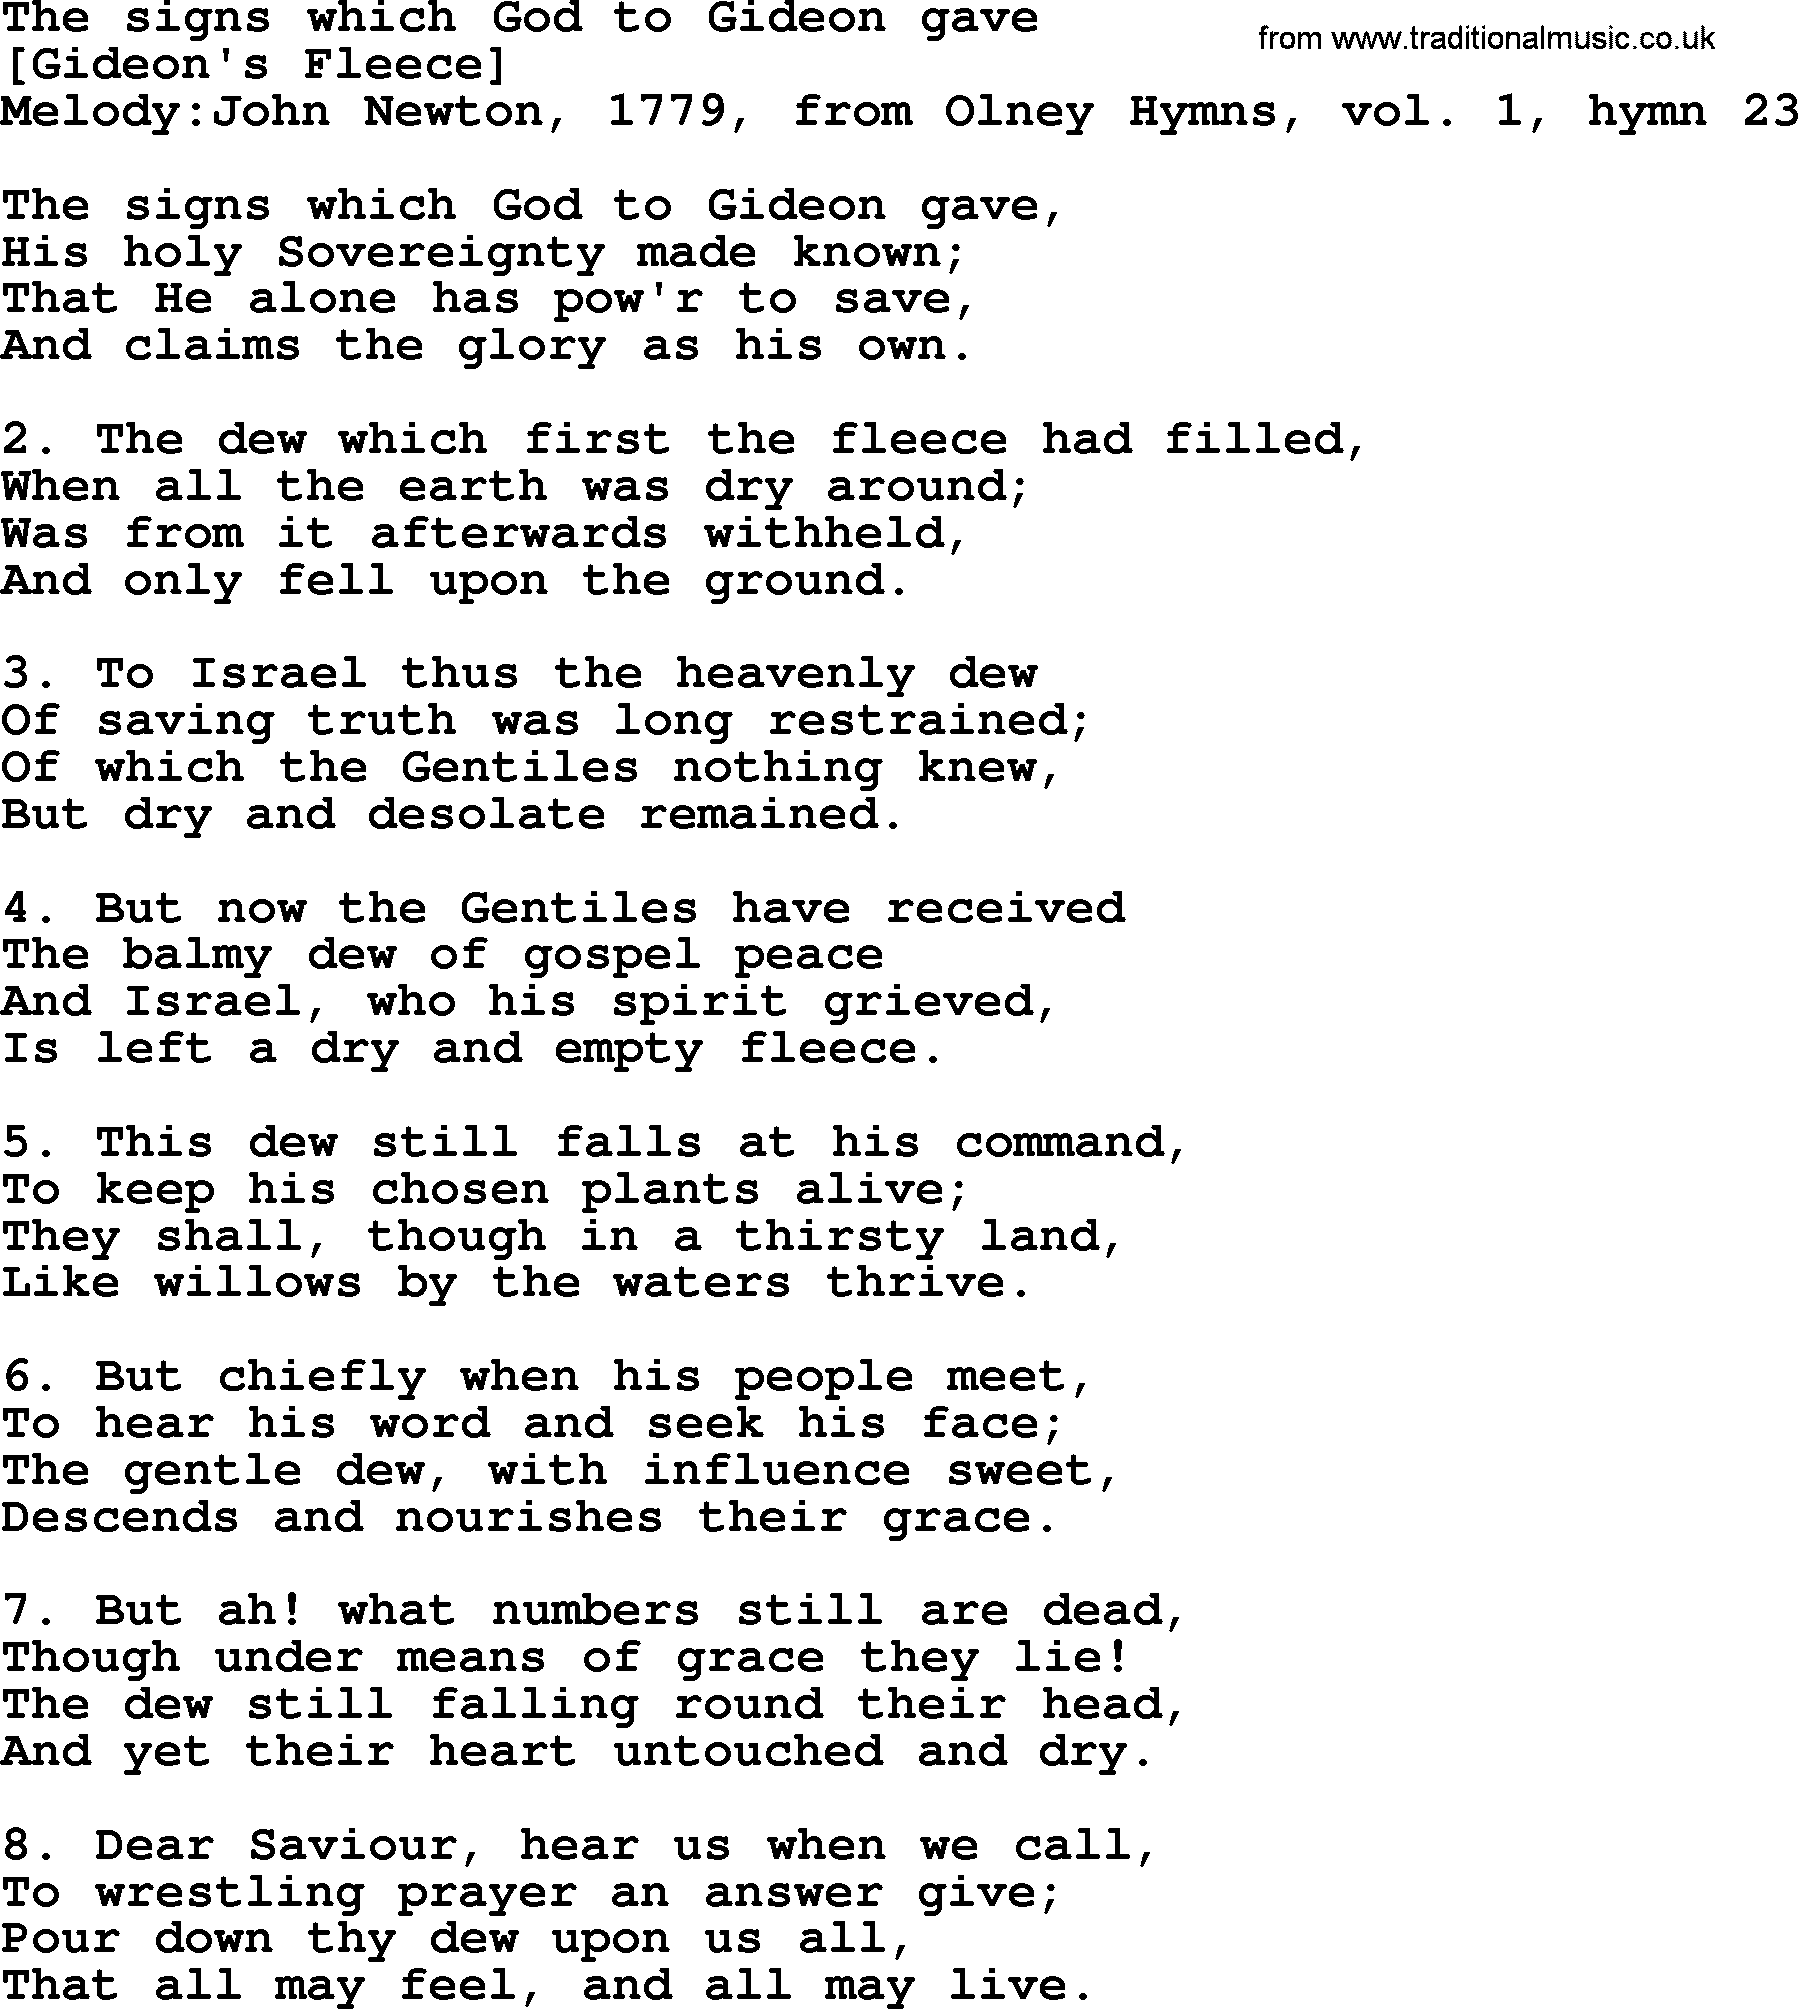 Old English Song: The Signs Which God To Gideon Gave lyrics